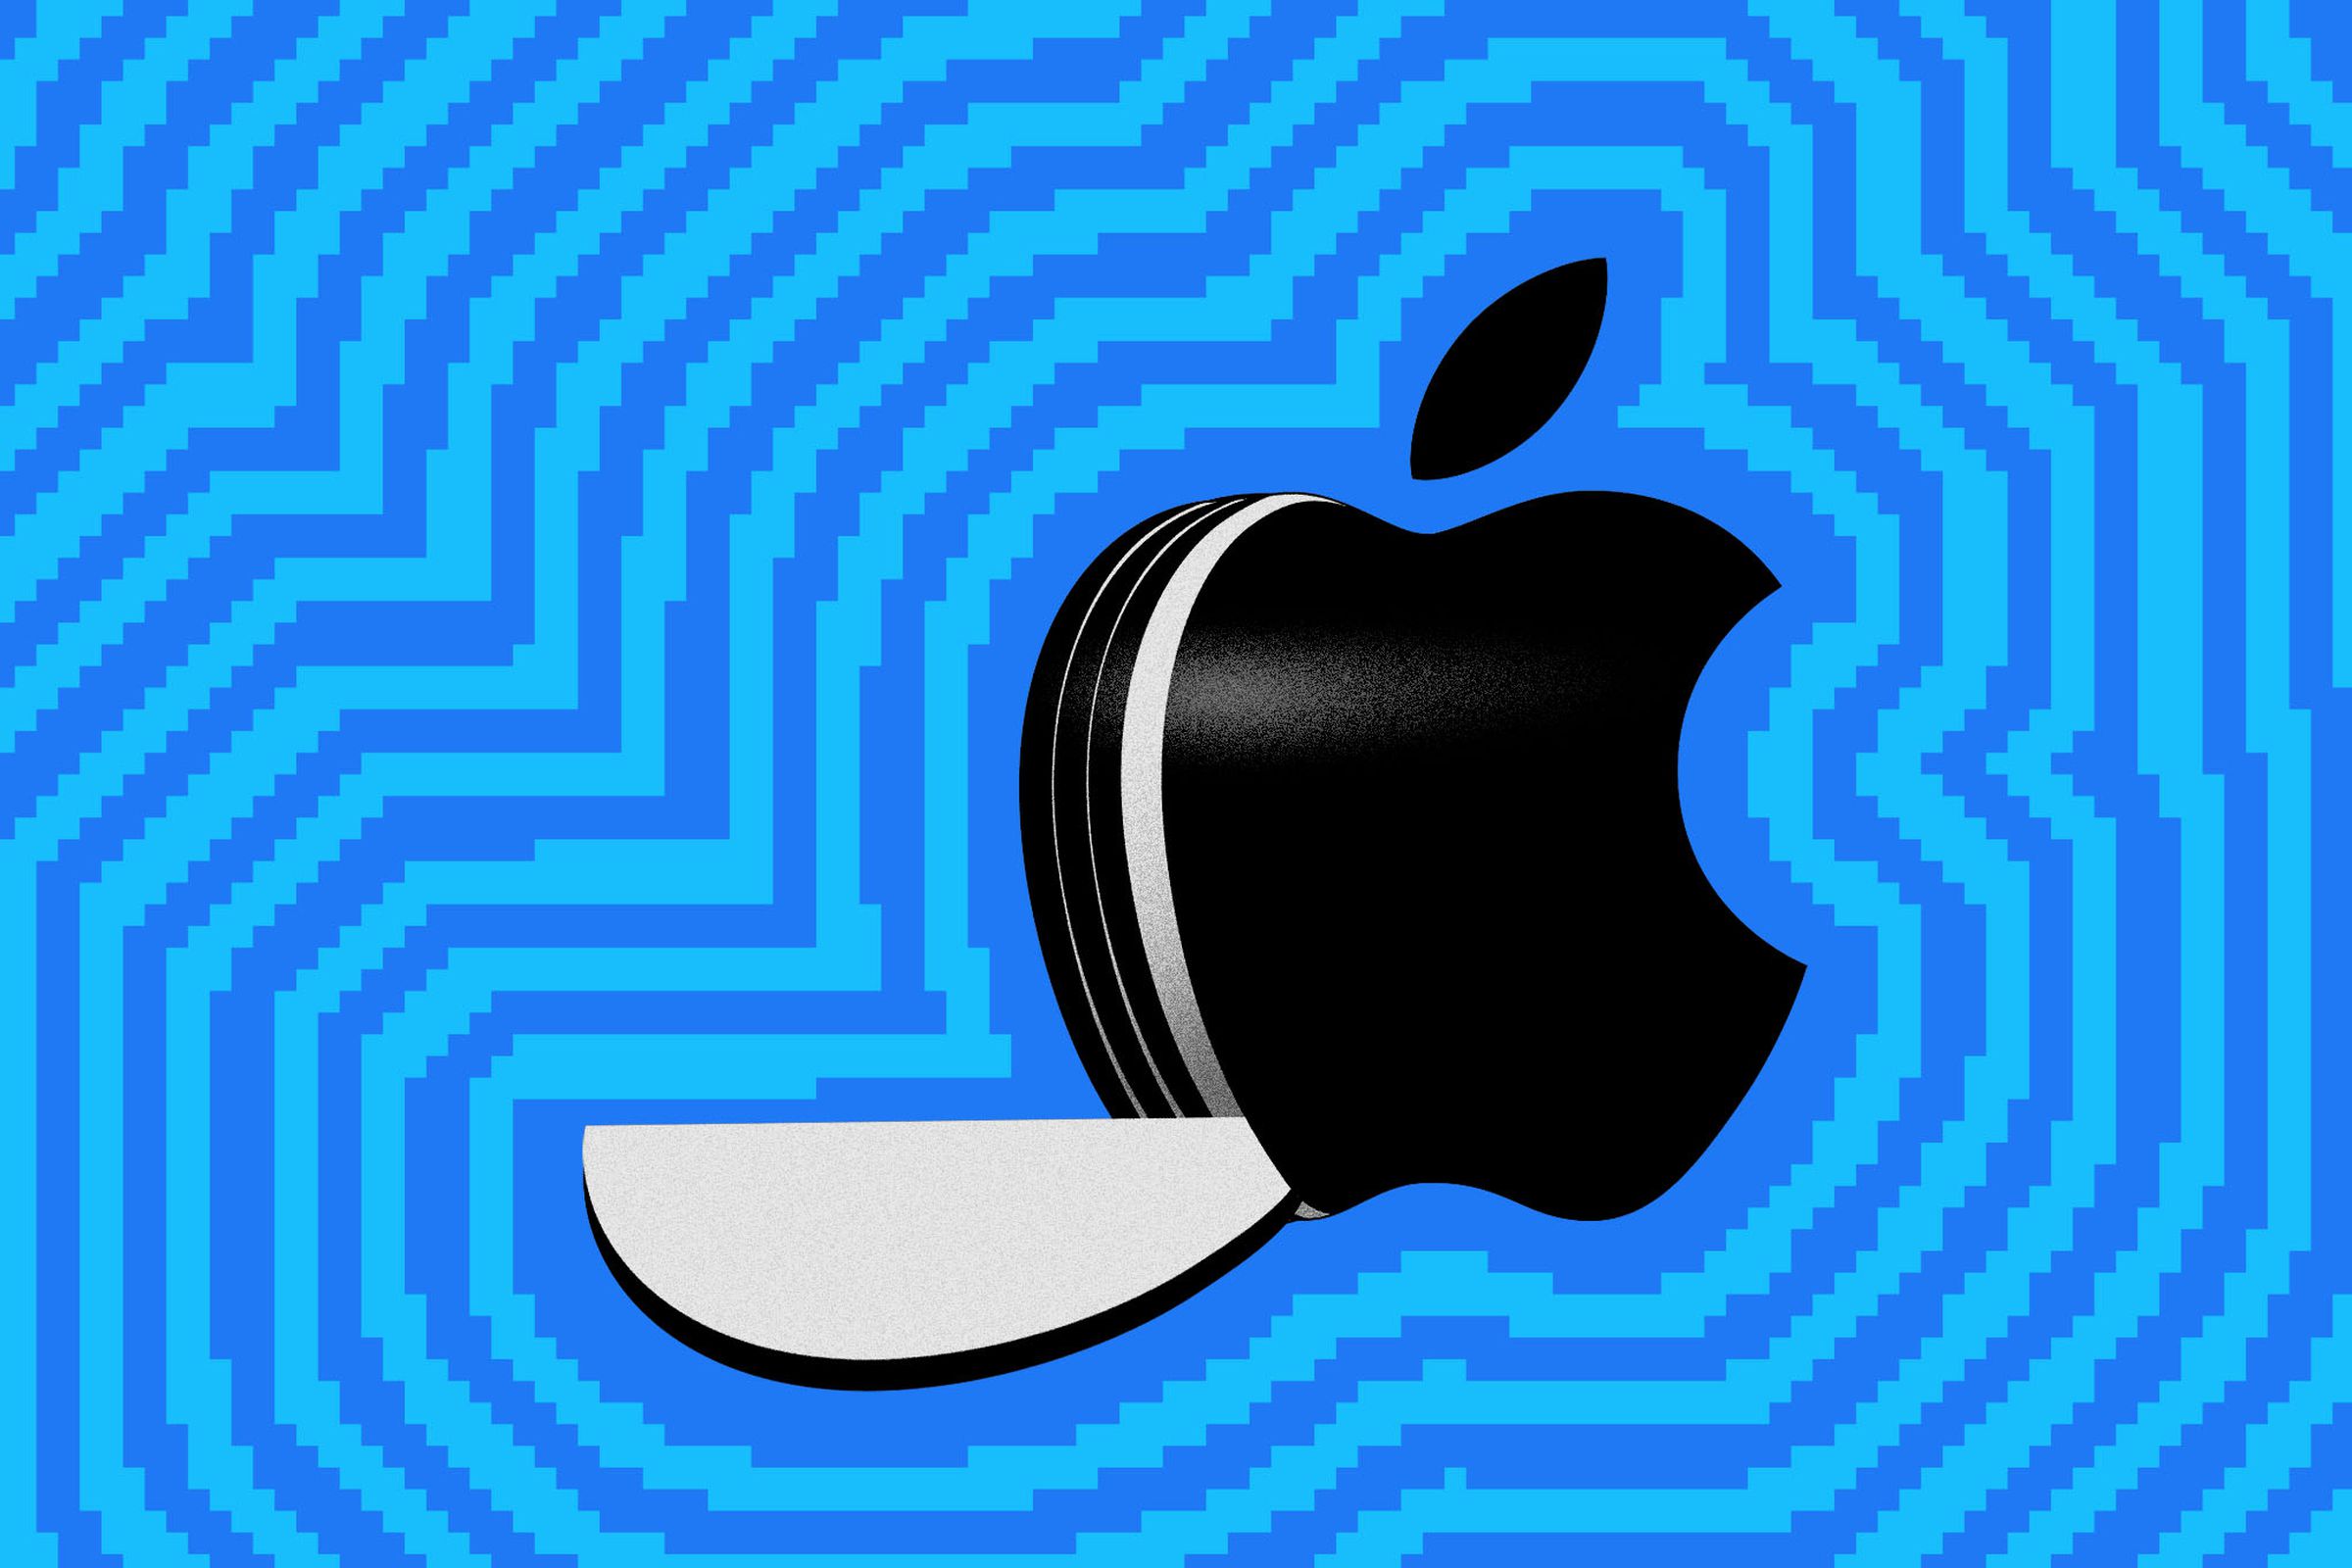 Illustration of the Apple logo with a slice falling out of it, implying breaking up a monopoly.